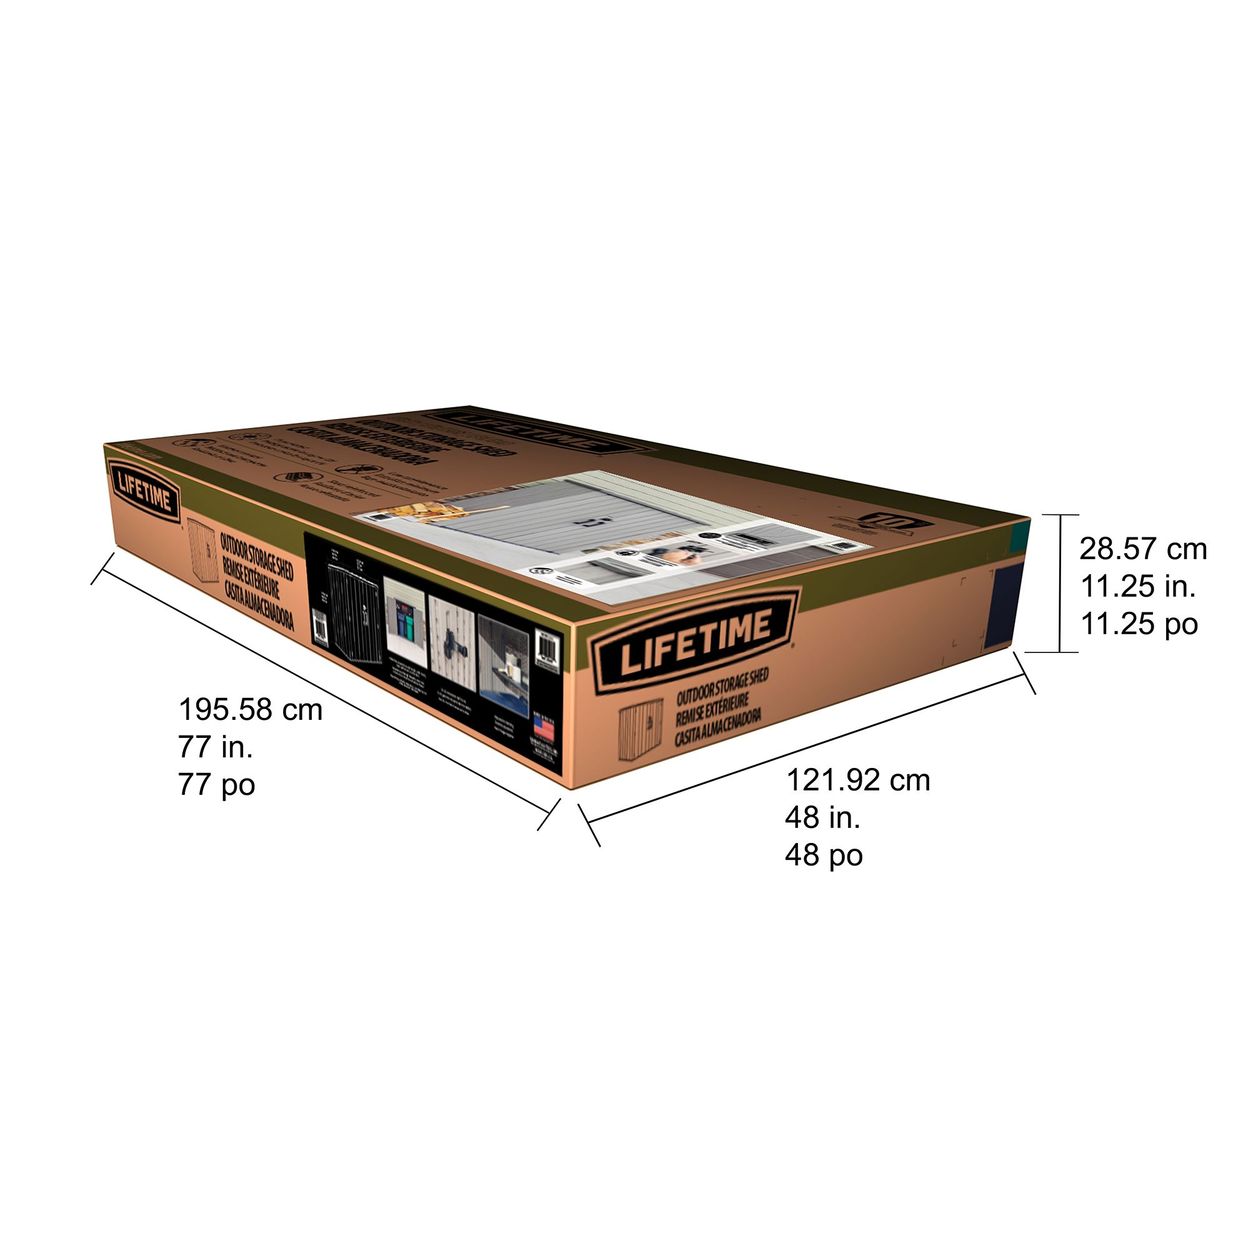 Product in box showing package dimensions in imperial and metric measurements.